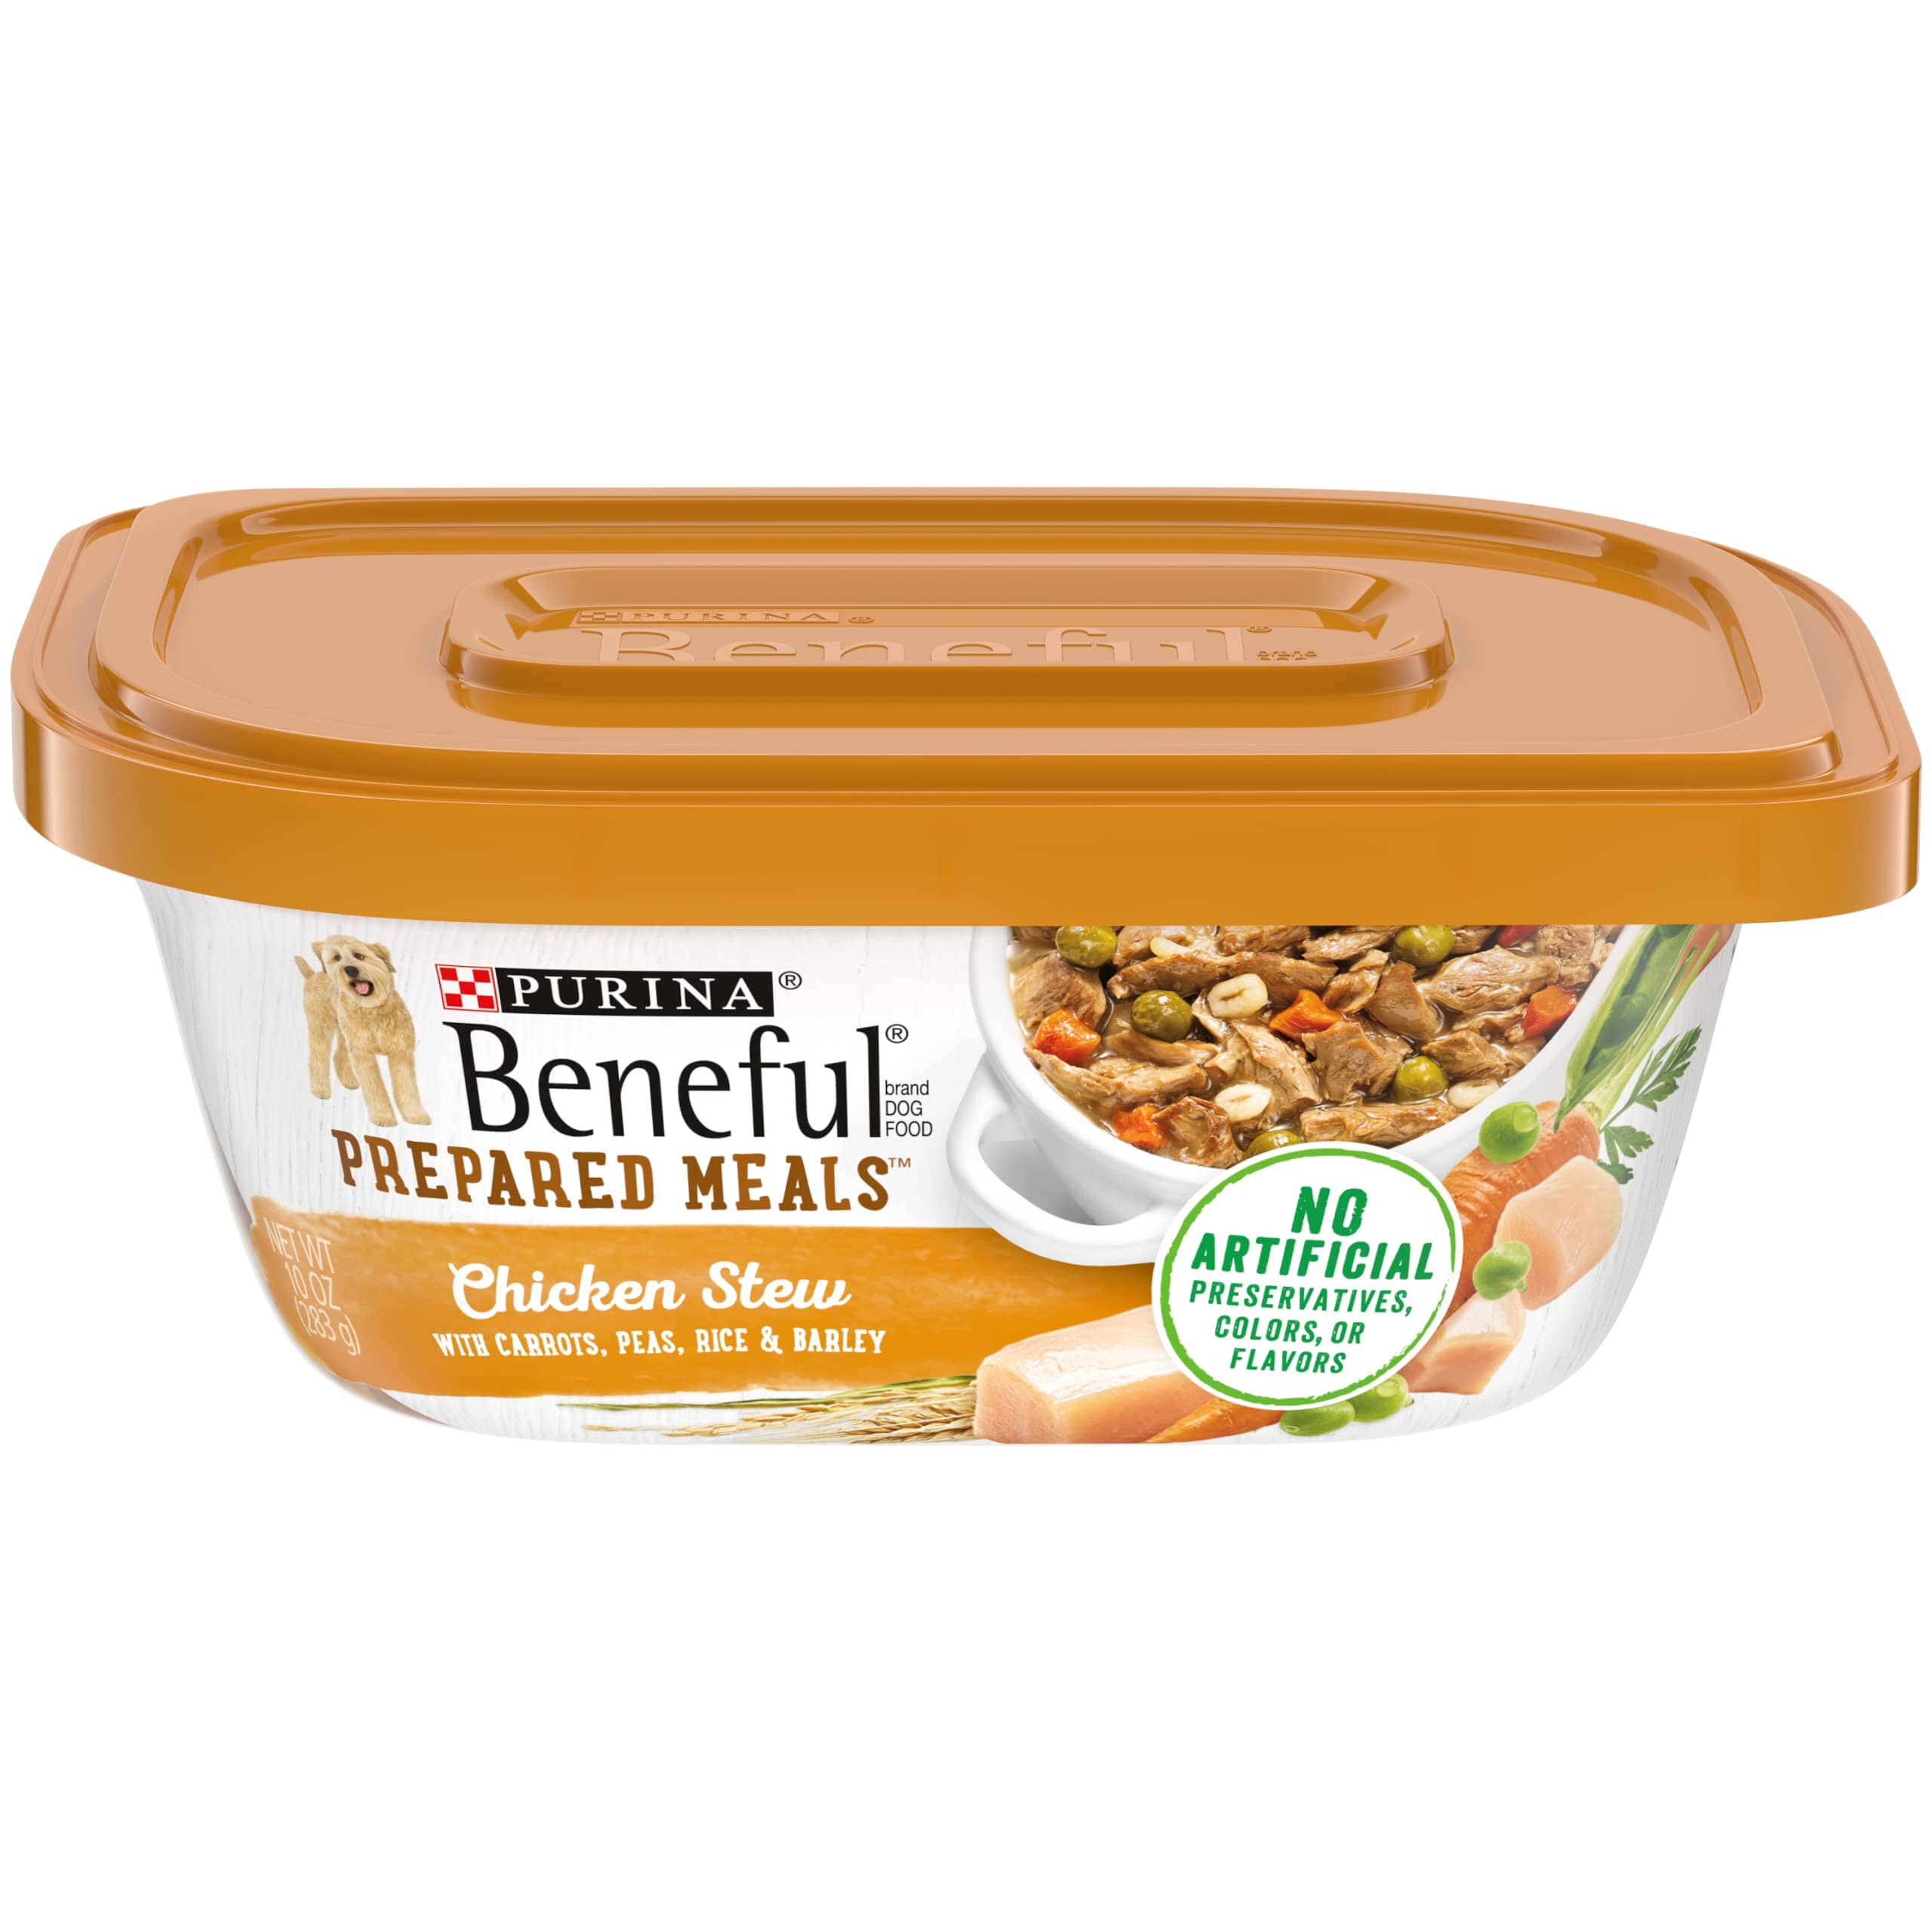 Purina Beneful Prepared Meals Chicken Stew with Carrots Peas Rice and Barley Wet Dog Food Trays - 10 Oz - Case of 8  